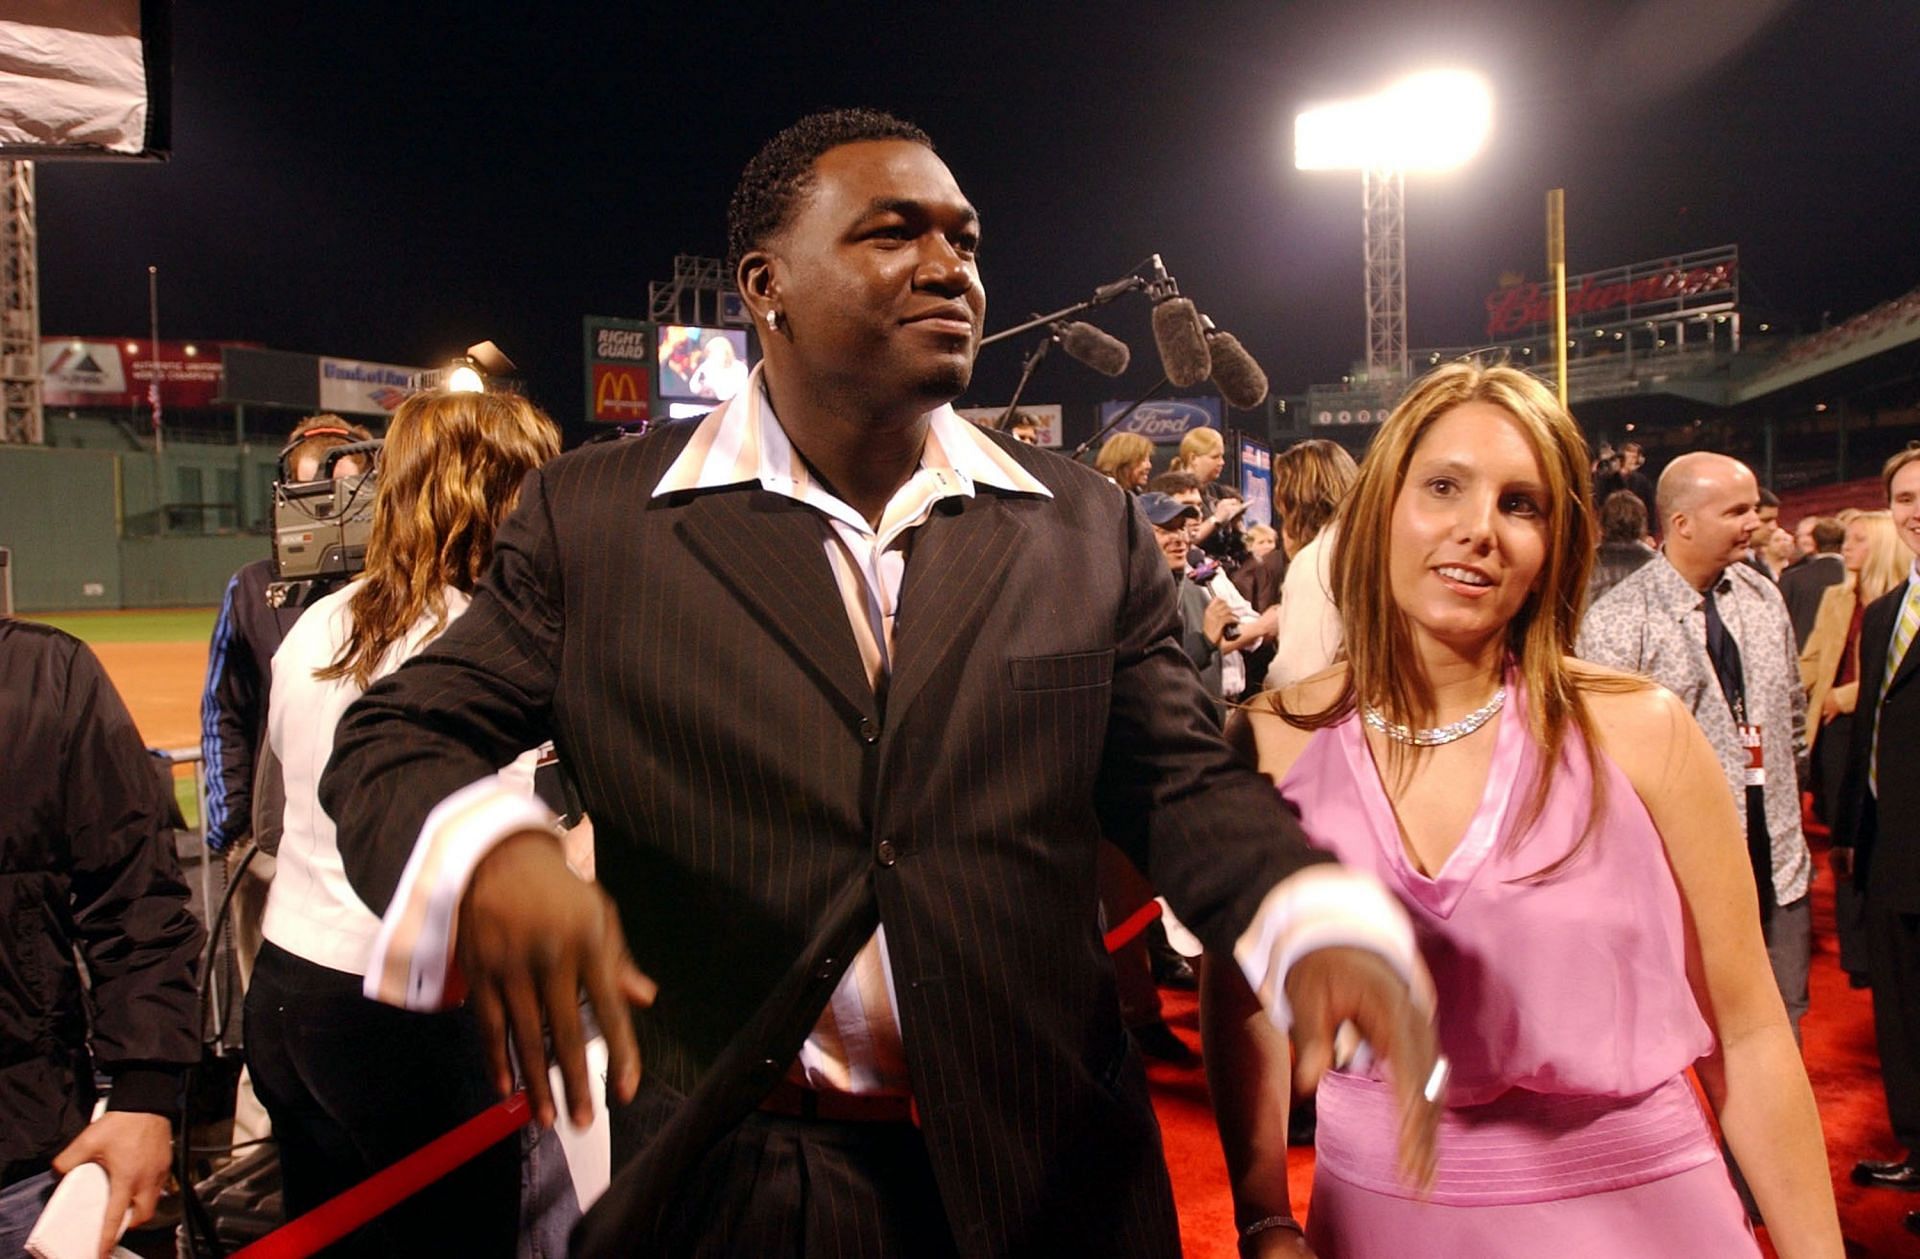 PRed Sox designated hitter David Ortiz and wife Tiffany attend the World Premiere of the new movie &quot;Fever Pitch&quot; April 6, 2005 at Fenway Park in Boston, Massachusetts. The film opens nationwide April 8.